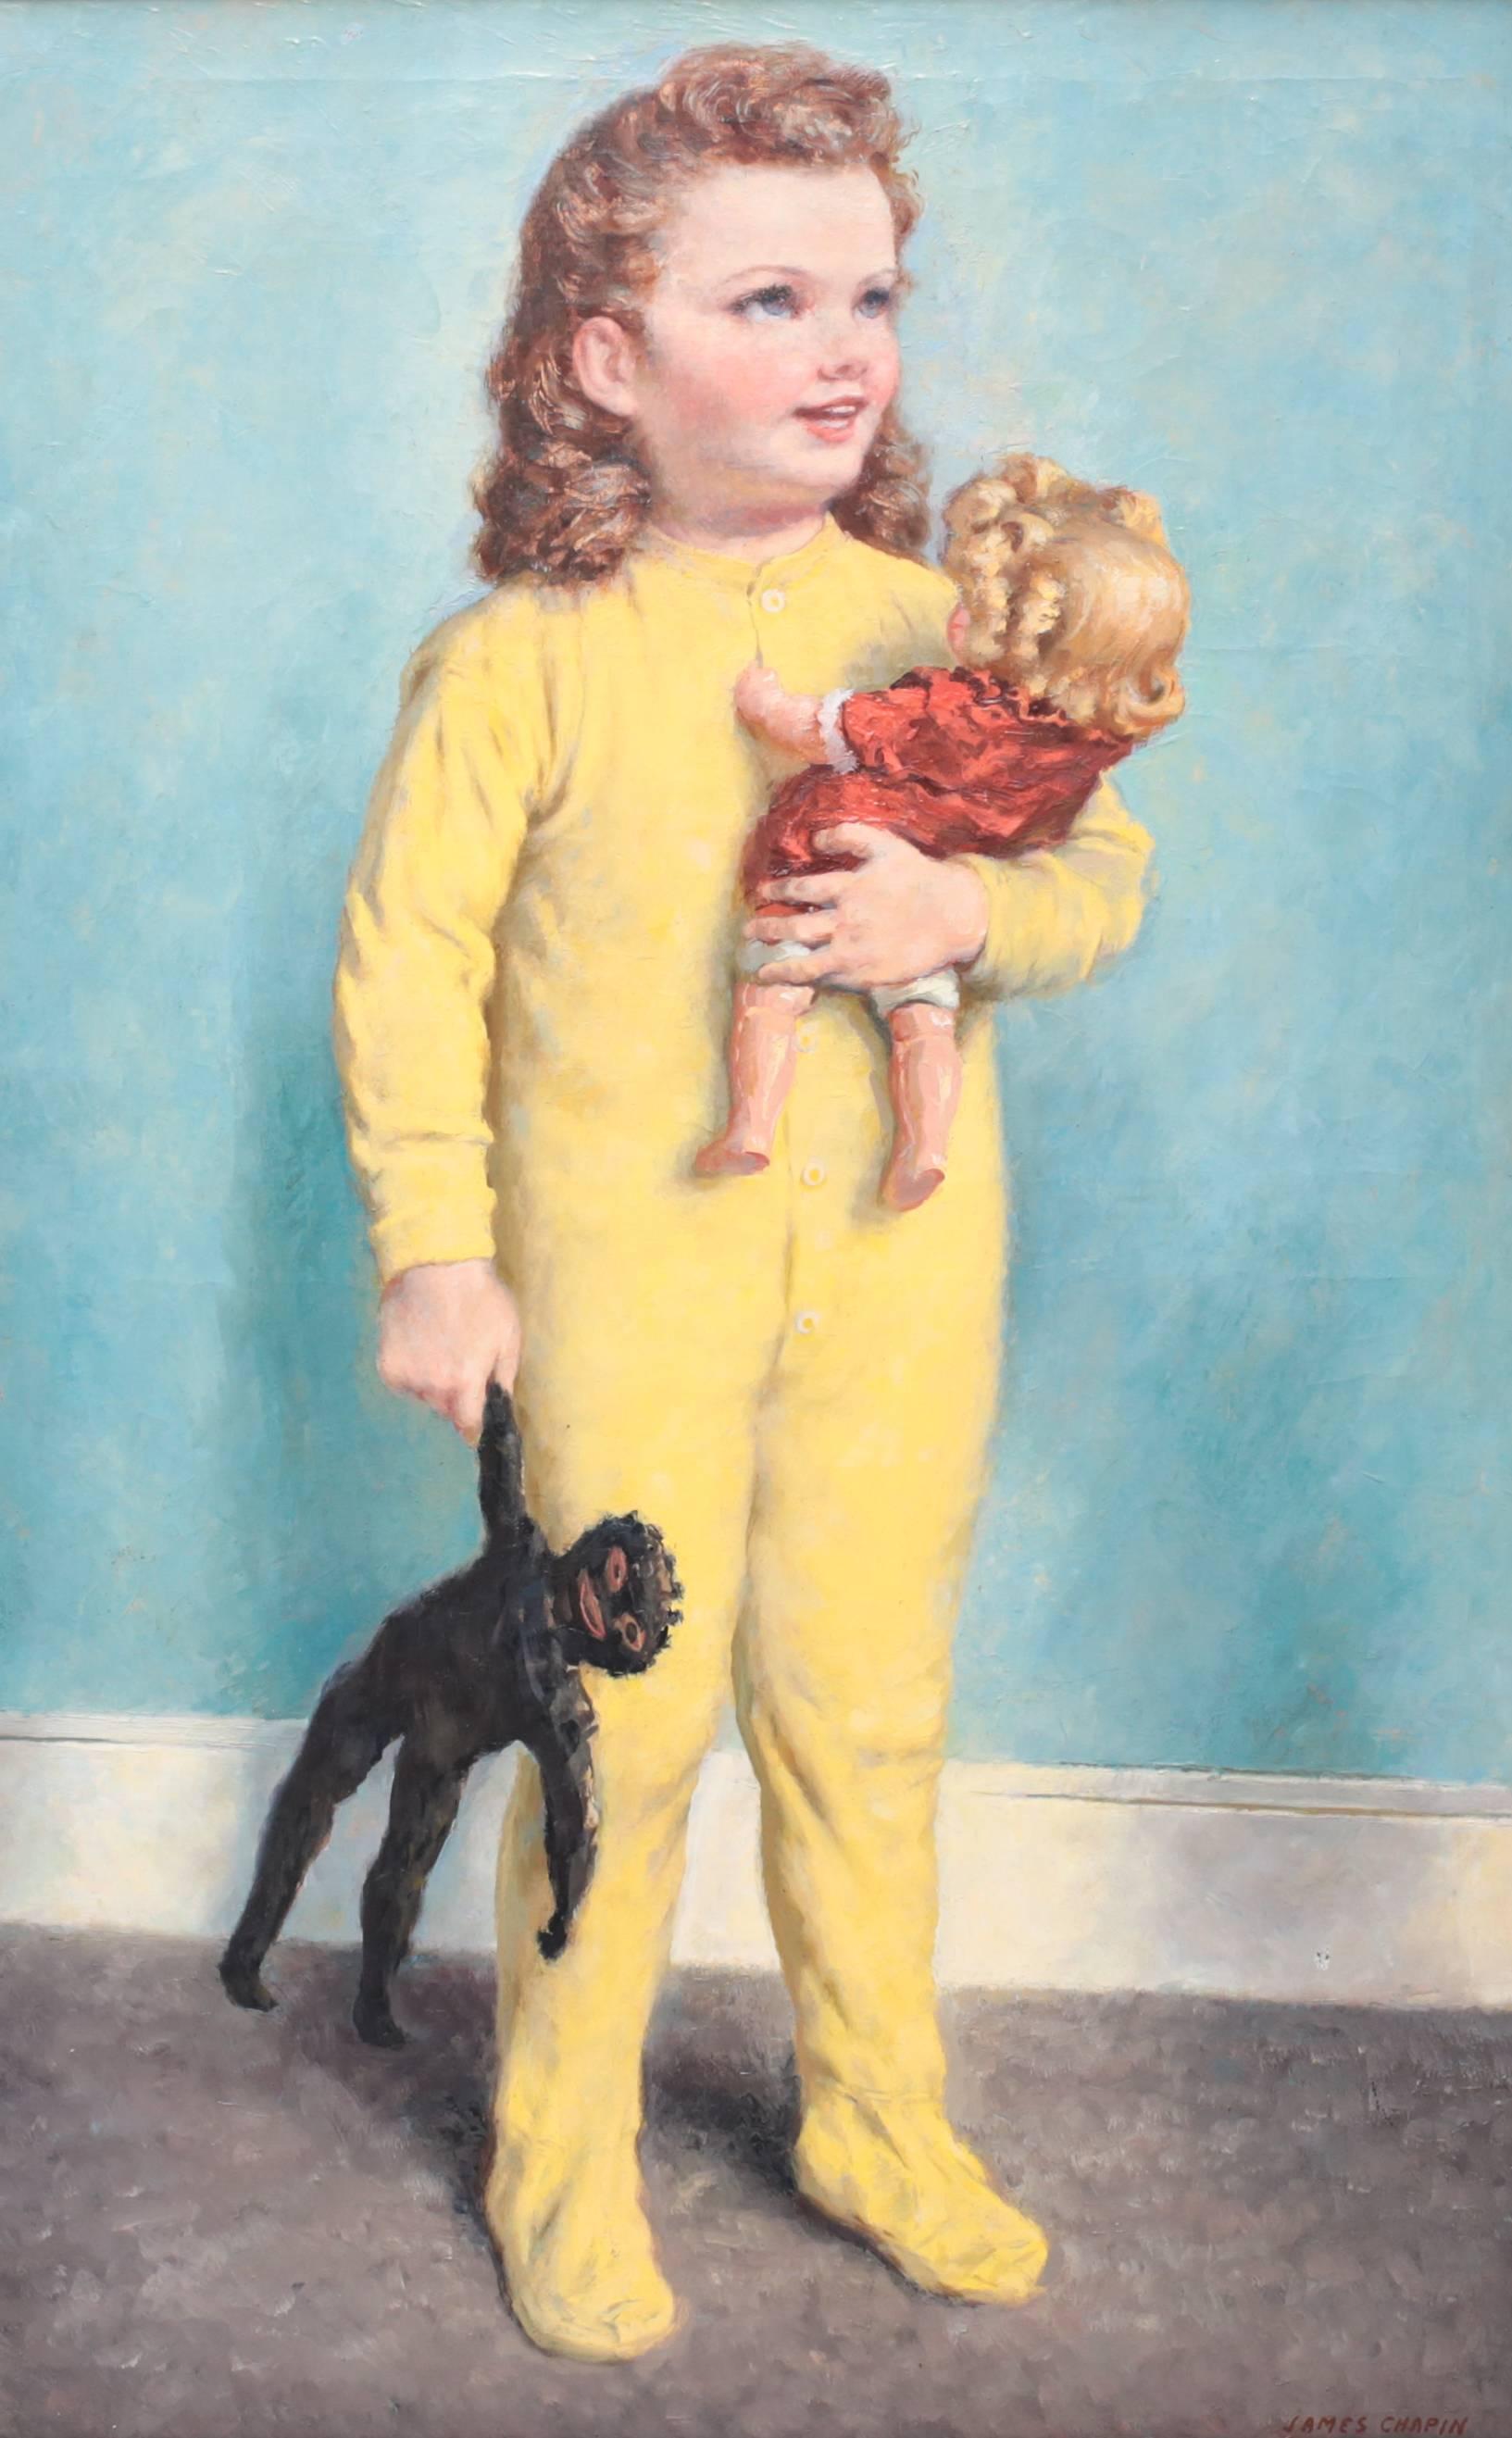 Darling oil on canvas portrait painting of a beautiful young child holding two dolls by American artist James Ormsee Chapin (1887-1975). Snug in her yellow pyjamas, she tightly cradles one doll and clutches onto the other as she smiling looks